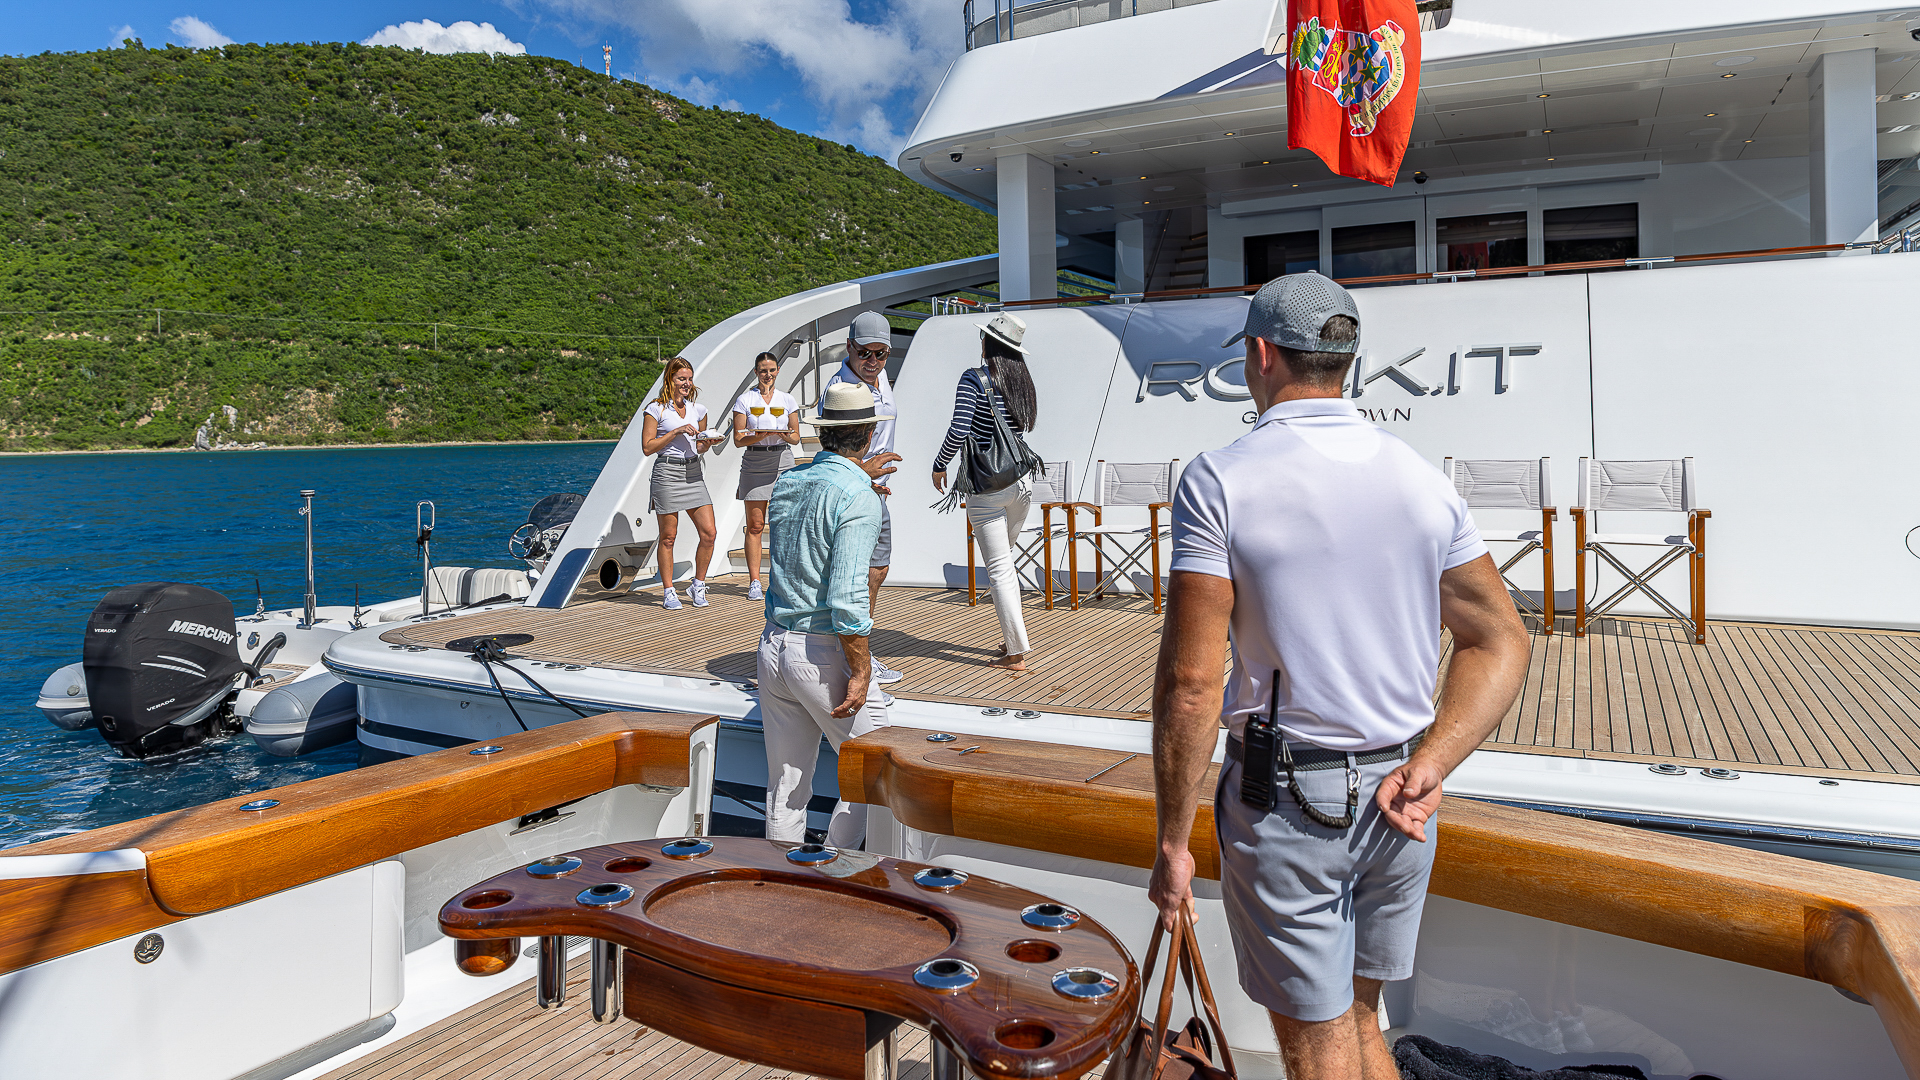 Rock It - Welcome - Arriving Aboard - Credit Yachting Image